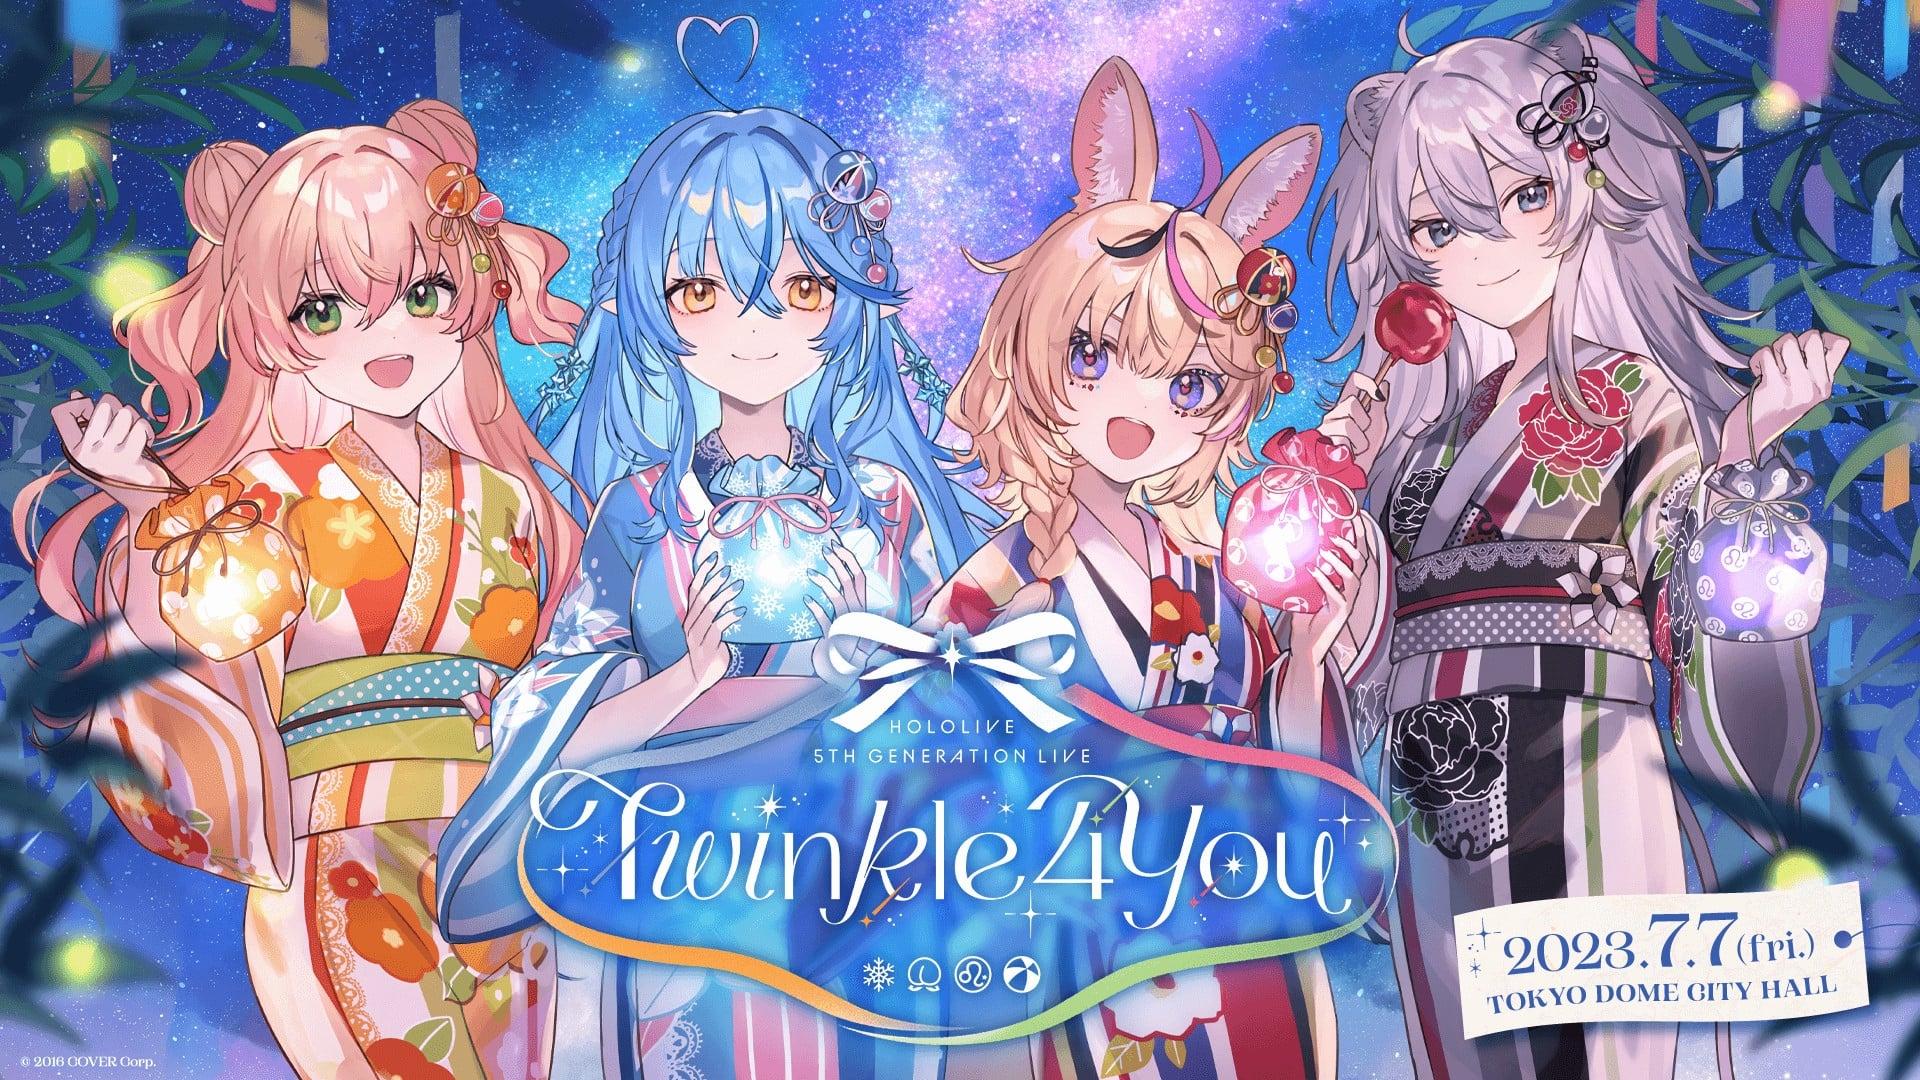 hololive 5th Generation Live "Twinkle 4 You" backdrop